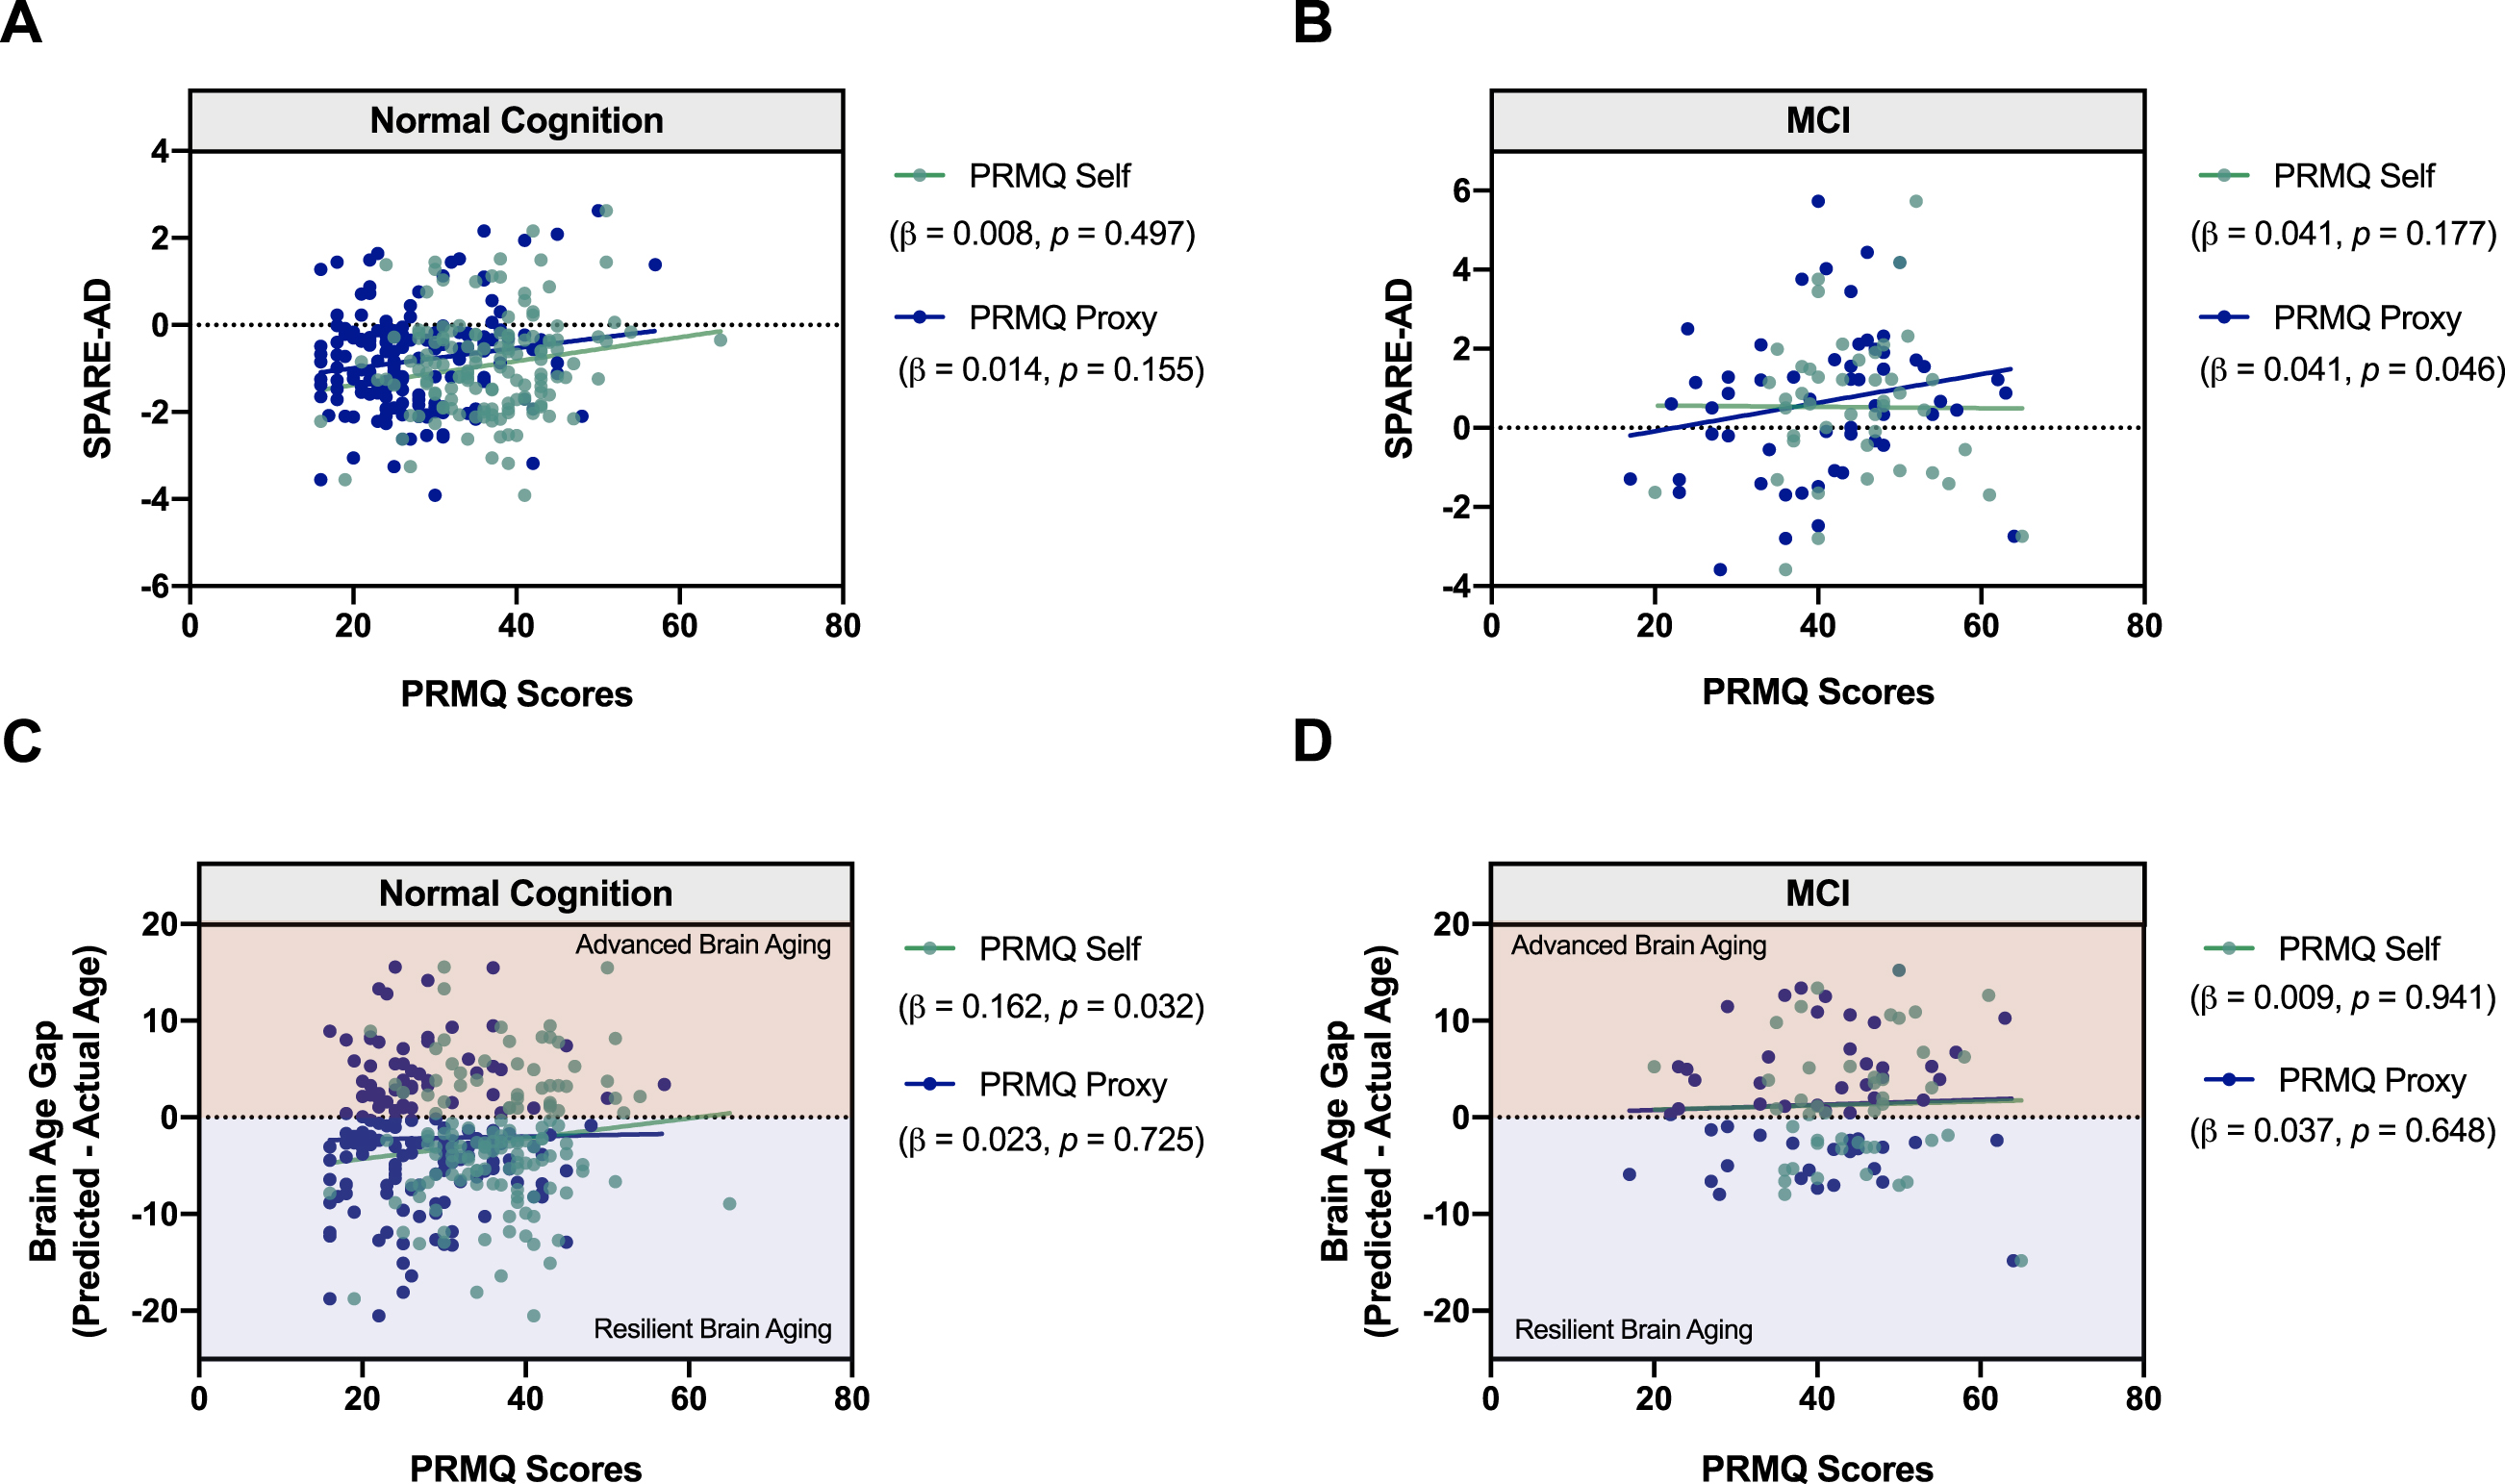 Relationship between SMCs and patterns of brain atrophy associated with AD and aging. Scatter plots shows the relationships between SPARE-AD index and self- and partner-reported SMCs (PRMQ Self and Proxy Scores) in (A) NC participants and (B) MCI participants. Greater partner-reported SMCs were associated with more pronounced AD-related atrophy. In MCI. C, D) Predicted Age of a subject can be ascertained based on the degree of brain atrophy in areas associated with aging (SPARE-BA index; see Methods). The Brain Age Gap for each subject was calculated by predicted— chronologic age, whereby positive values indicate advanced brain aging (shaded red), and negative values indicate resilient brain aging (shaded blue). Linear regressions were performed to evaluate the relationship between the Brain Age Gap and SMCs in NC and MCI participants after controlling for chronologic age, sex, race, and education. Scatter plots represent the relationship between the Brain Age Gap and self- and partner-reported SMCs (PRMQ Self and Proxy Scores) in (C) NC and (D) MCI participants. Greater self-reported SMCs were associated with more pronounced age-related atrophy in NC.